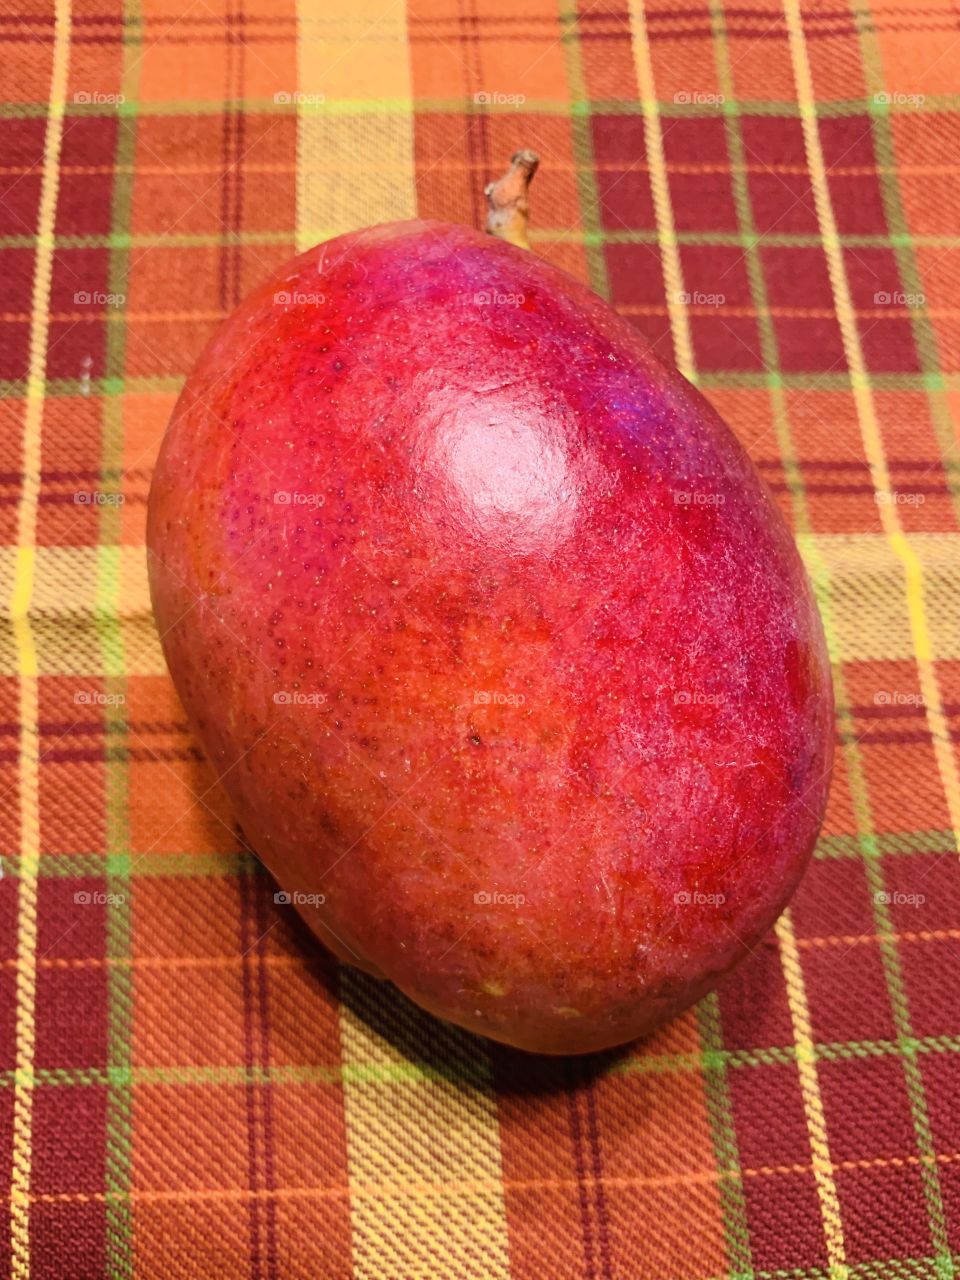 Mango ripe for the eating 